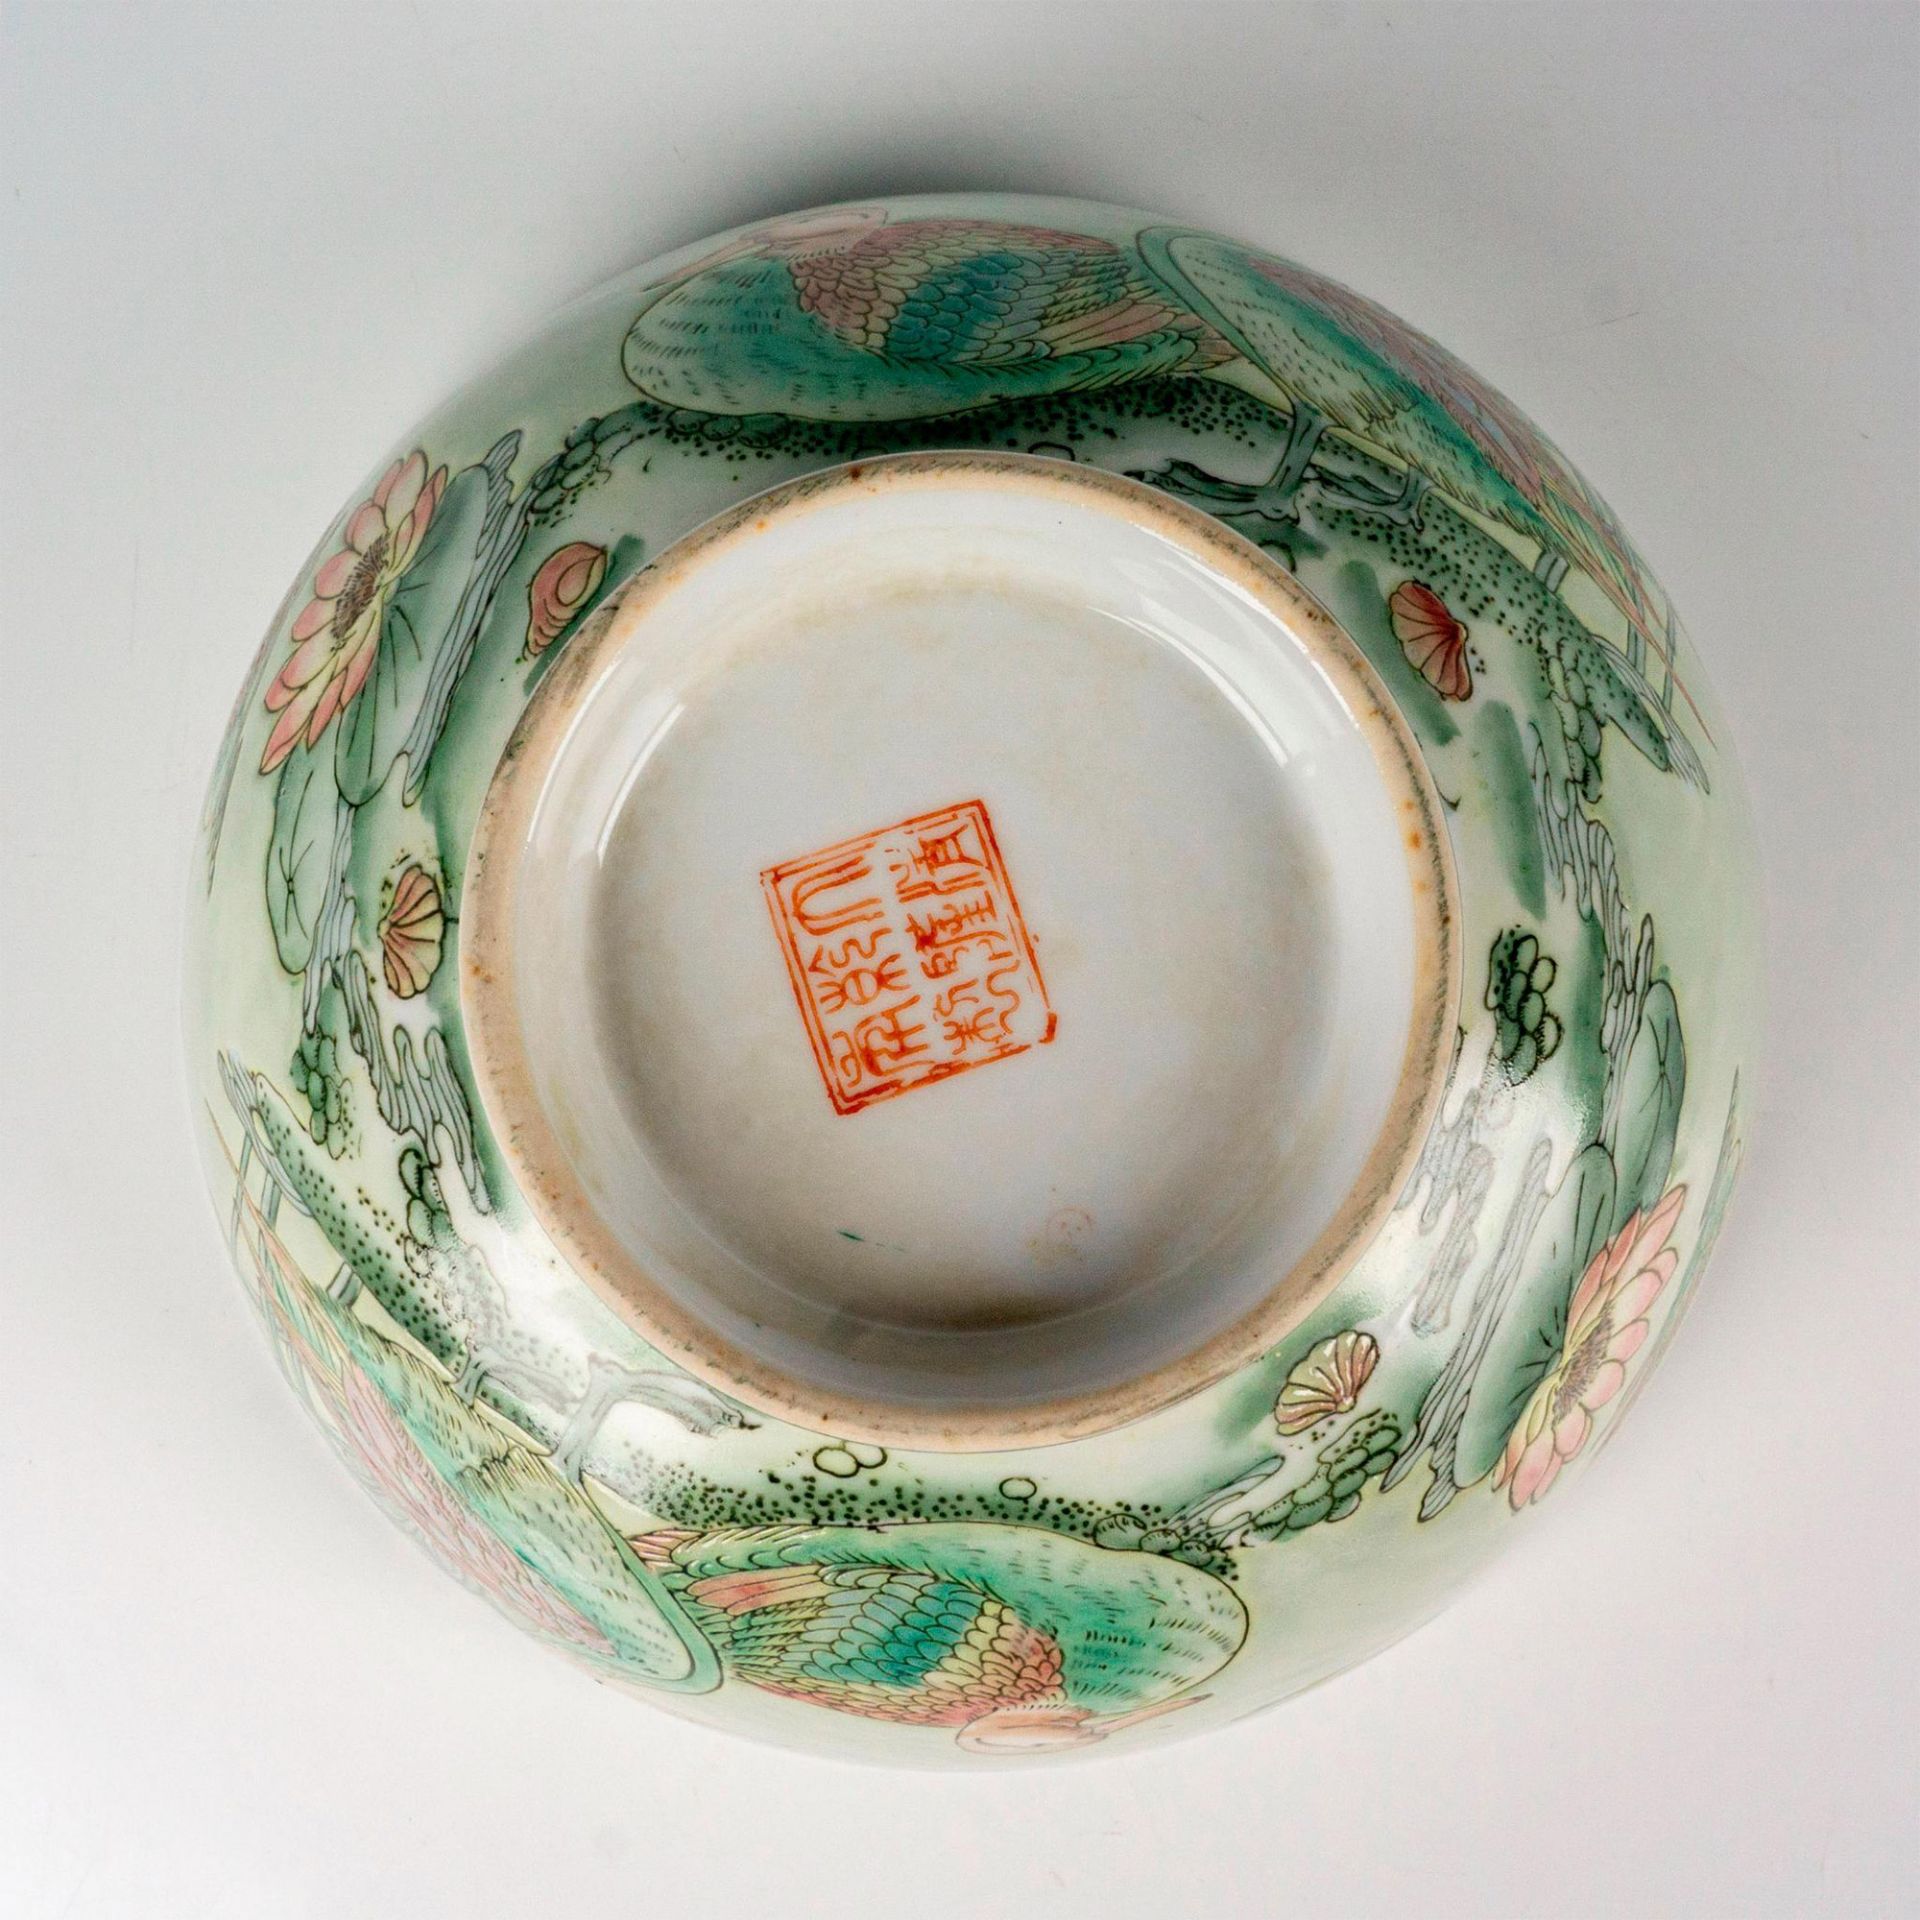 Chinese Porcelain Celadon Painted Duck Bowl - Image 4 of 5